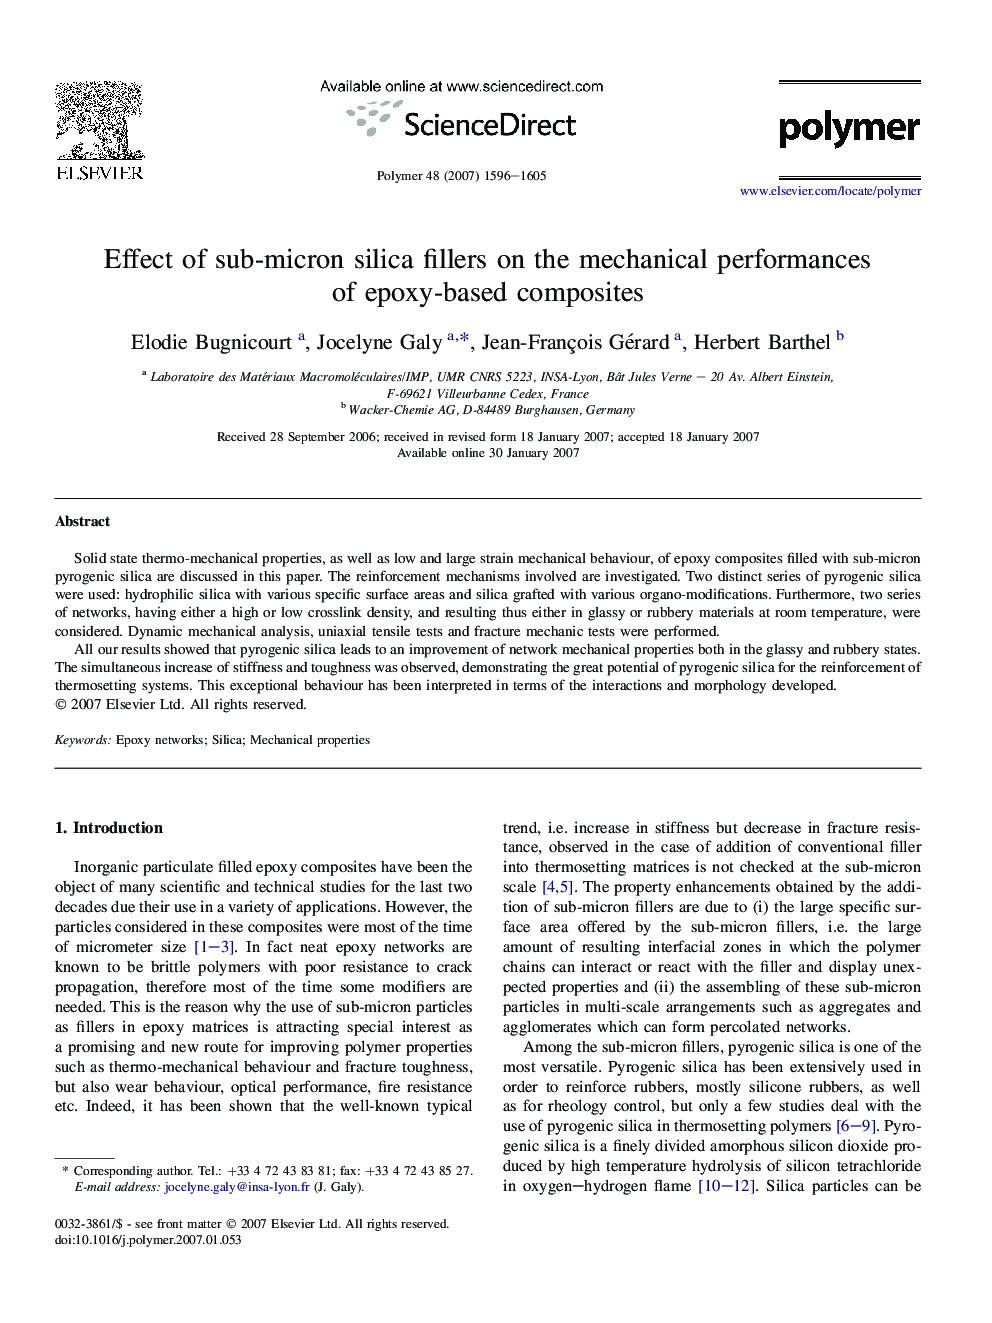 Effect of sub-micron silica fillers on the mechanical performances of epoxy-based composites